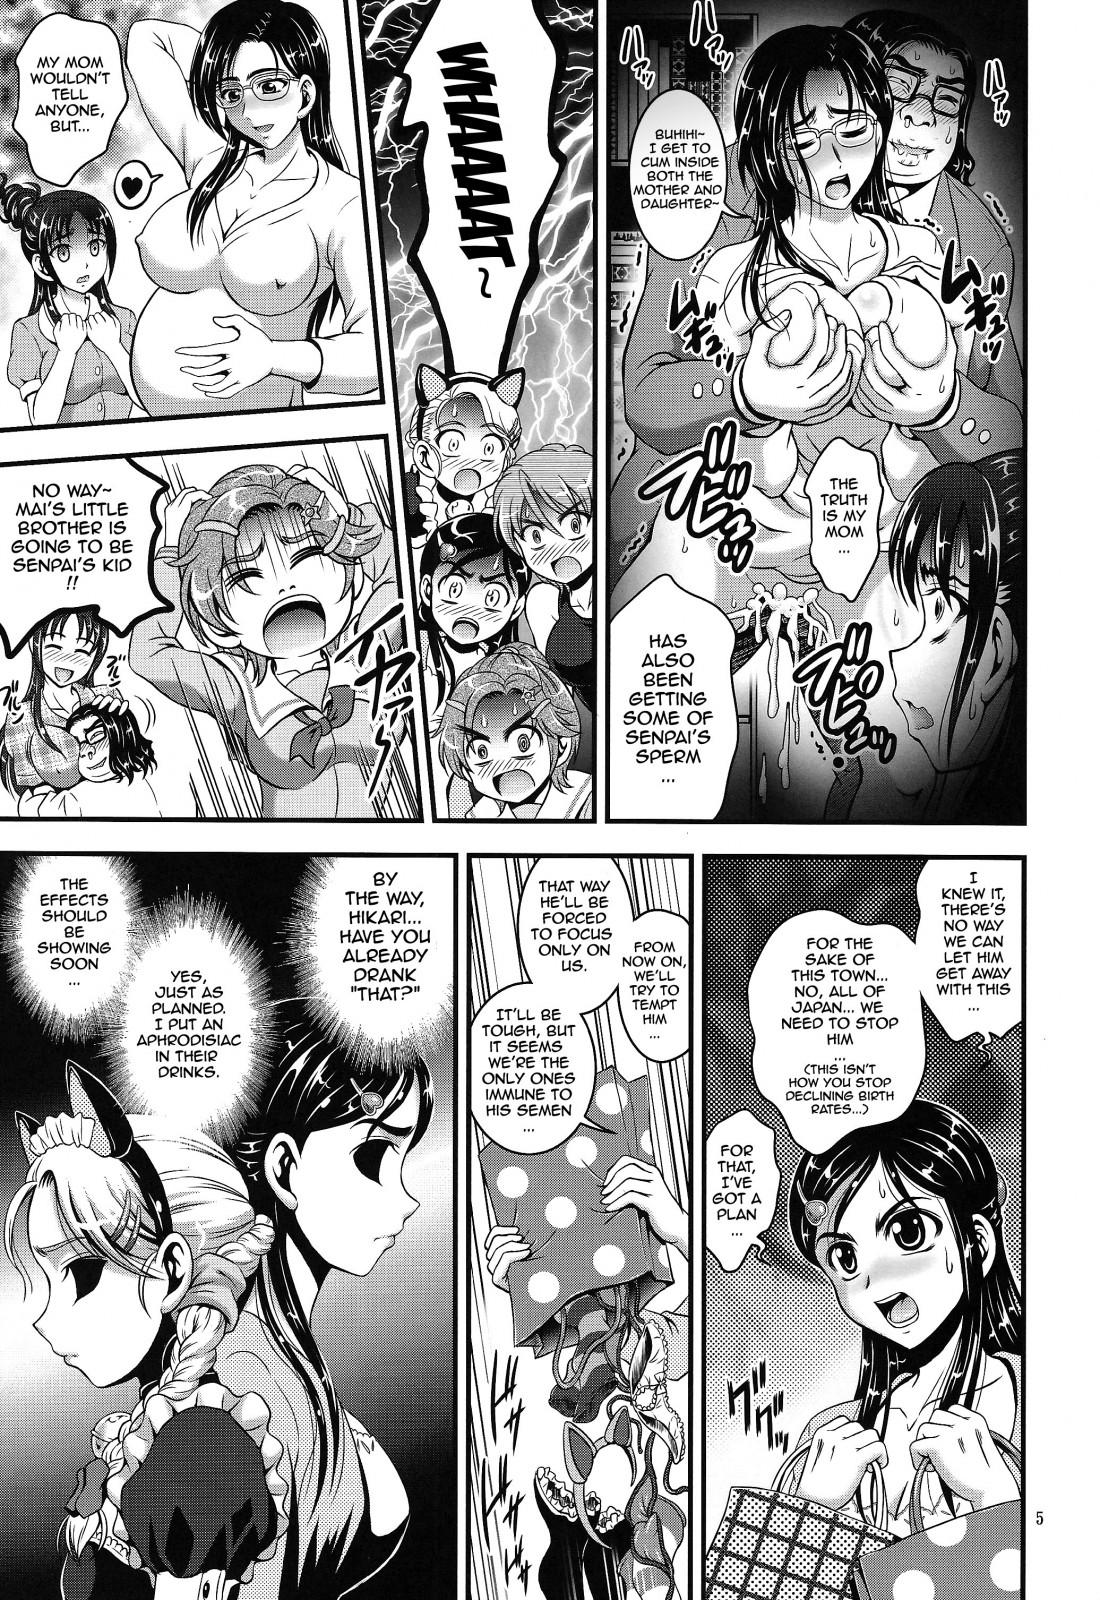 Thot Ore Yome Ranking 1 | My Bride Ranking 1 - Pretty cure Cop - Page 6